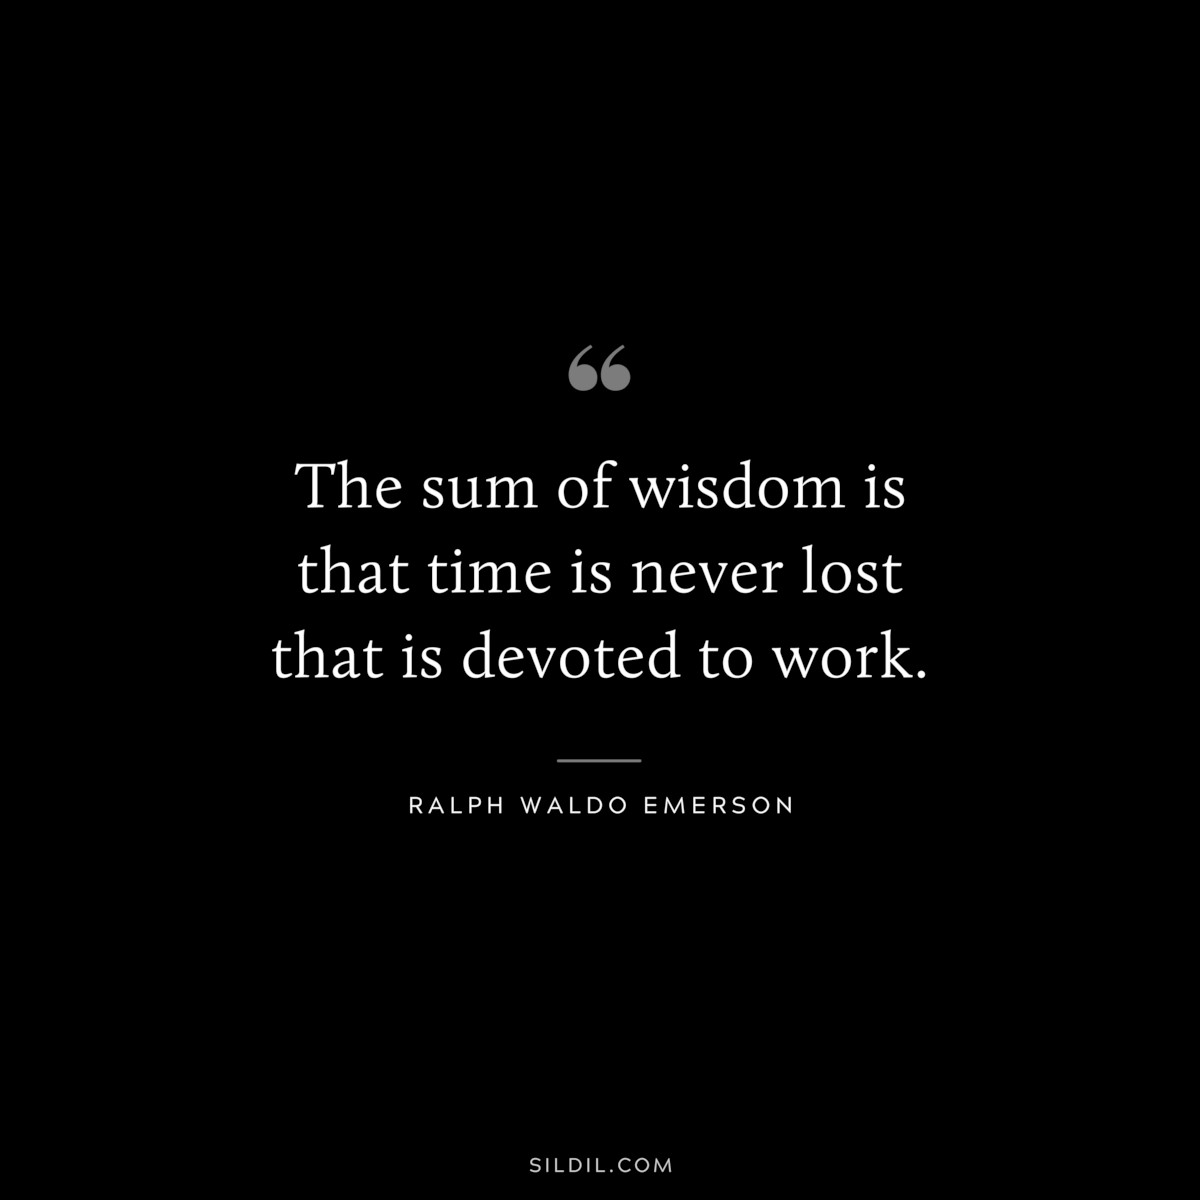 The sum of wisdom is that time is never lost that is devoted to work. — Ralph Waldo Emerson